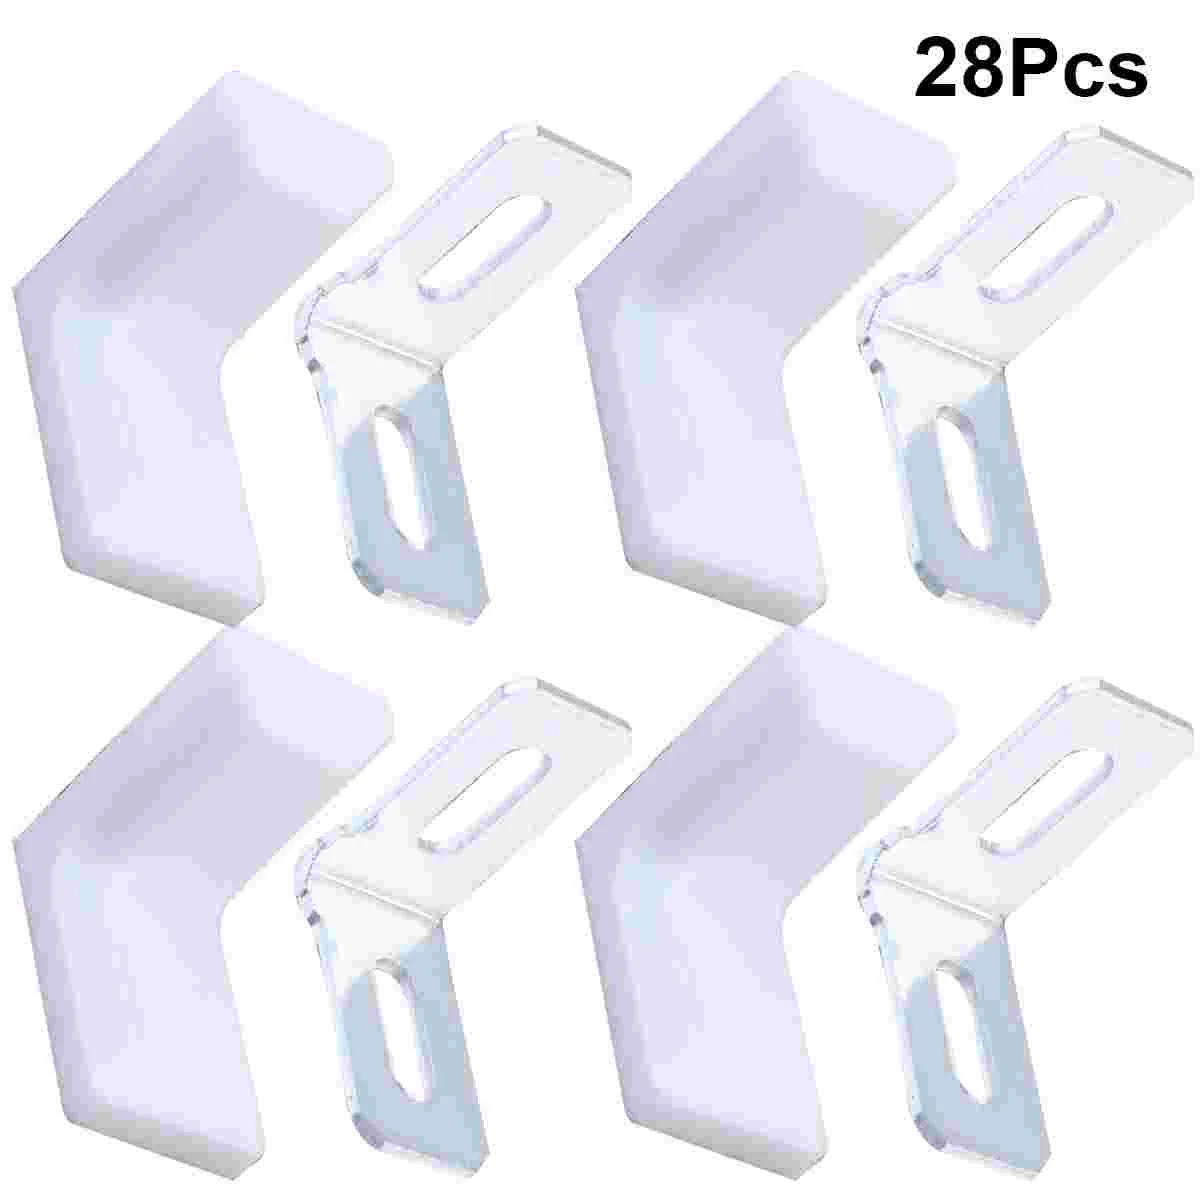 

28pcs 90 Degree Straight Angle Support Desk Chairs Reinforce Plastic Corner Furniture Fixed Angle Plastic Piece for Home (White)